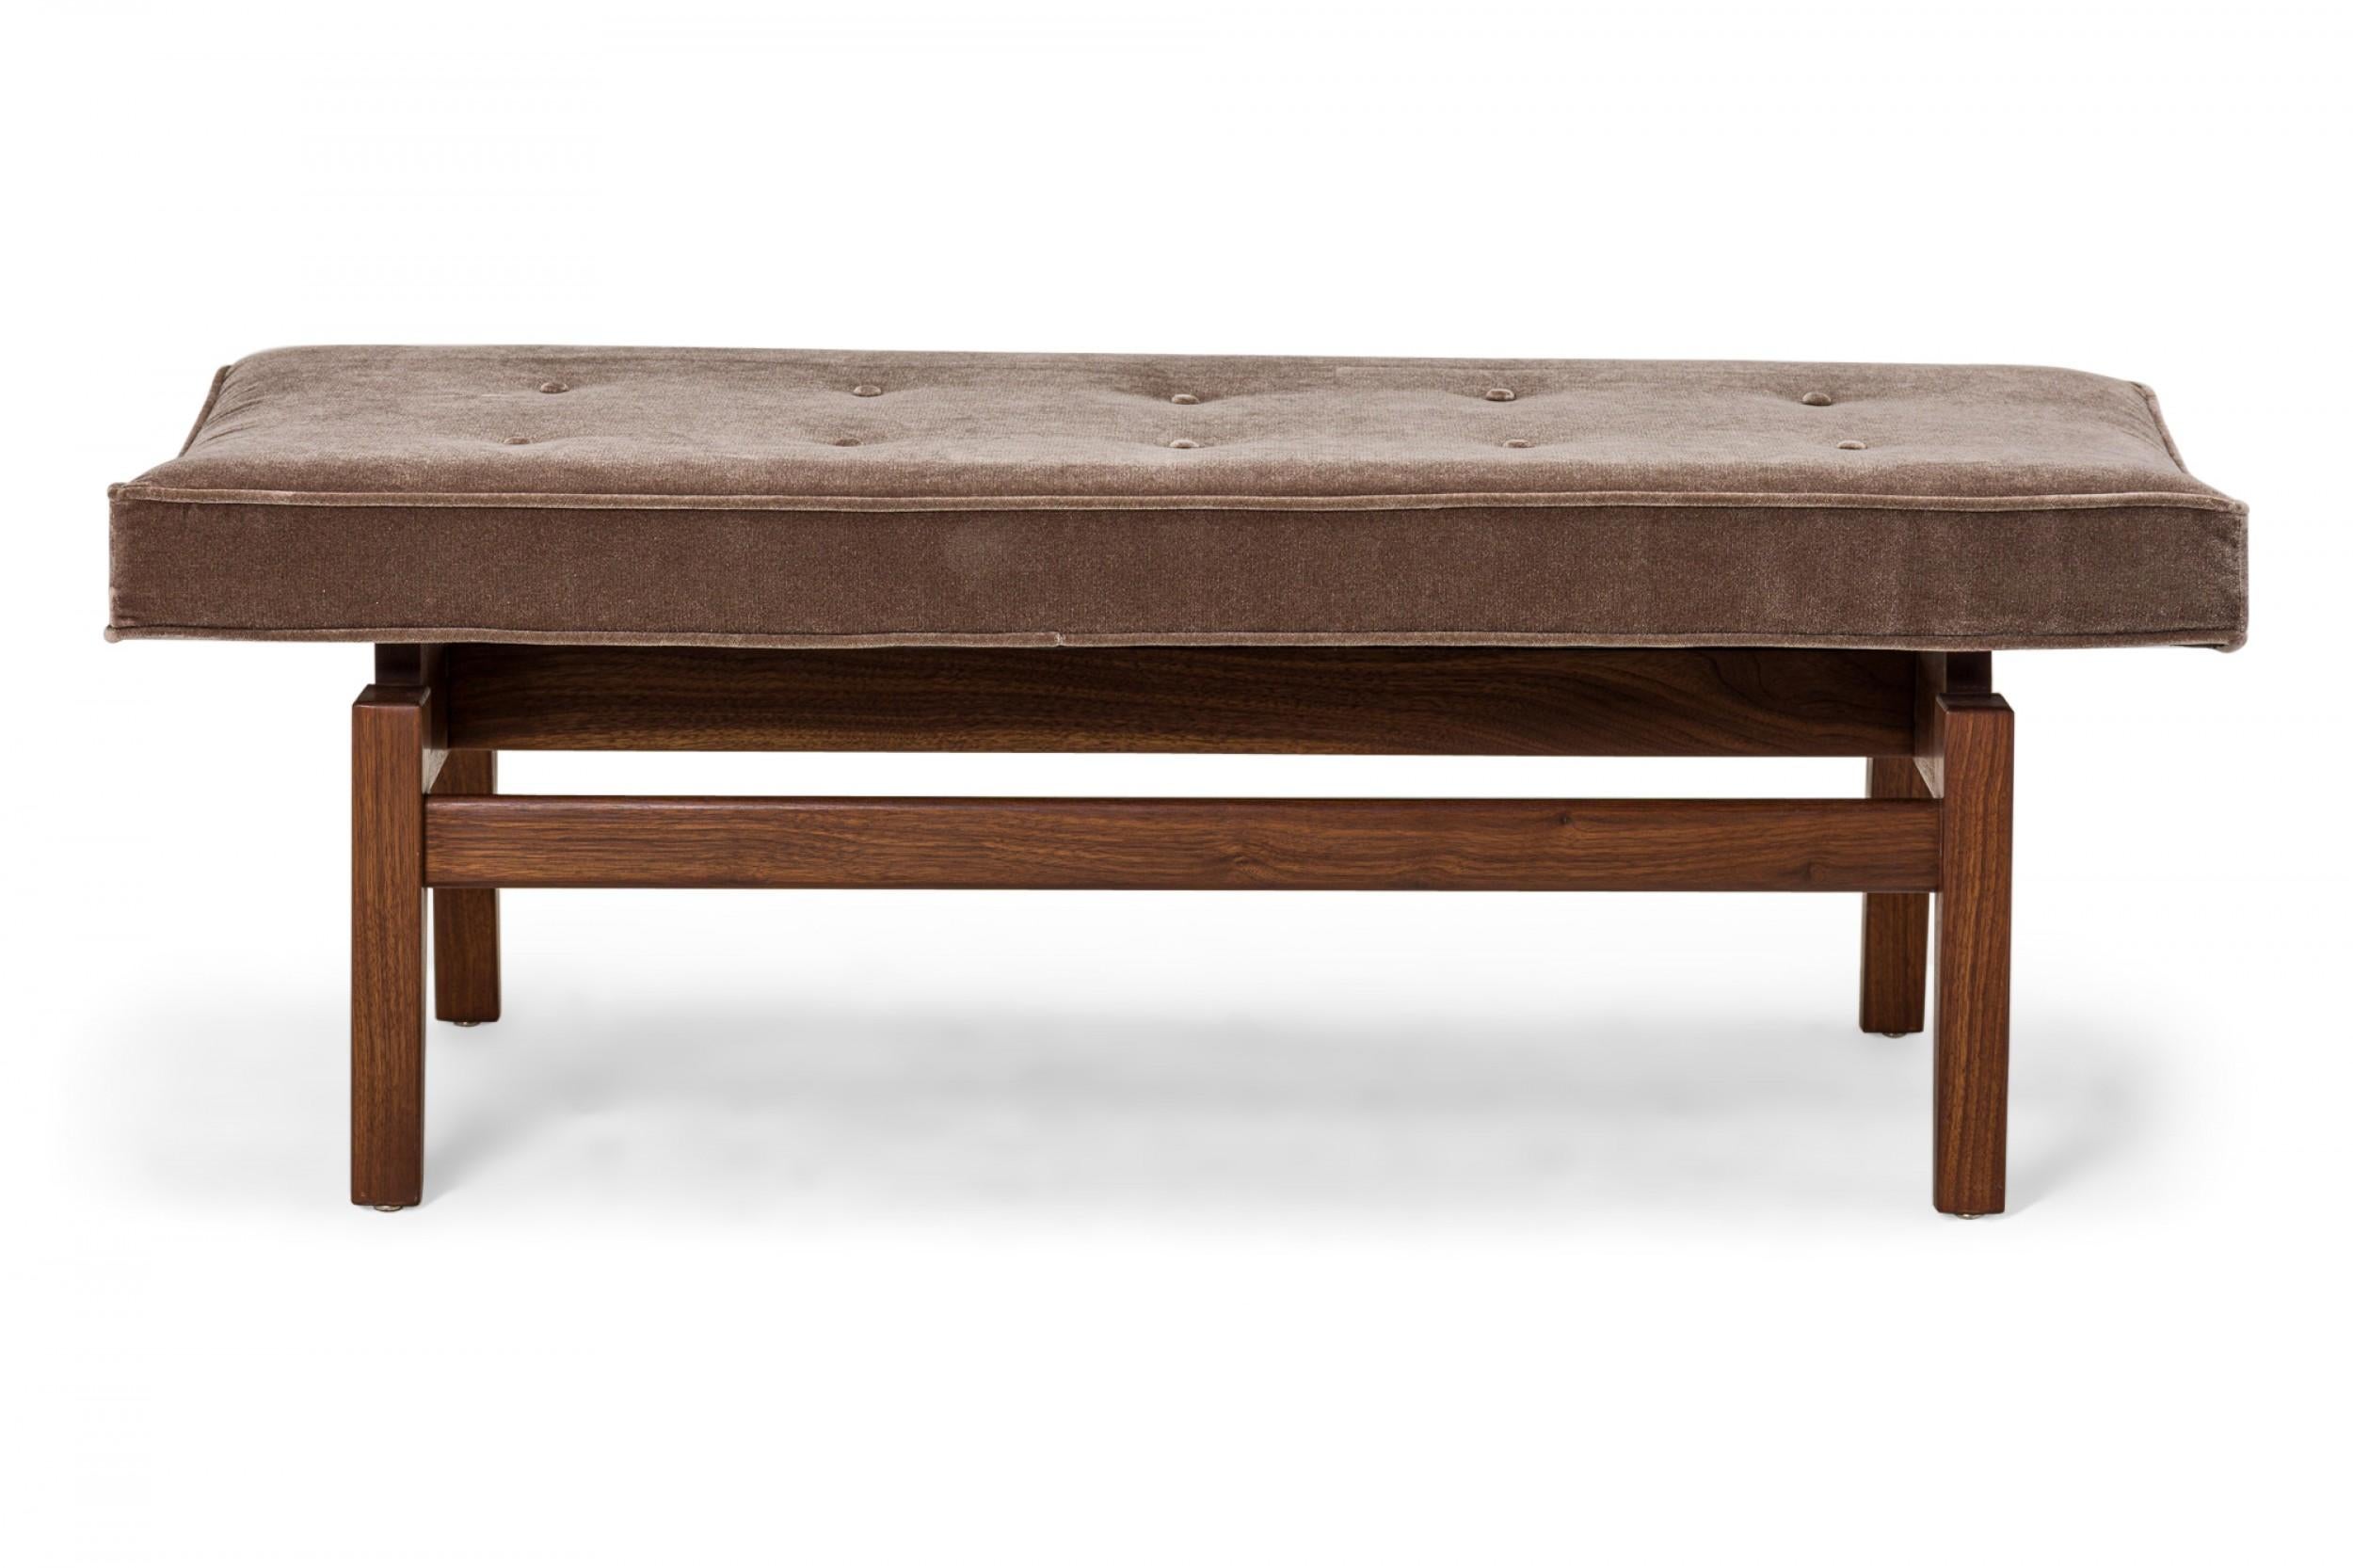 Danish Mid-Century floating bench with a walnut stretcher base supporting a rectangular seat cushion upholstered in gray velvet with button tufted detail. (JENS RISOM).
 